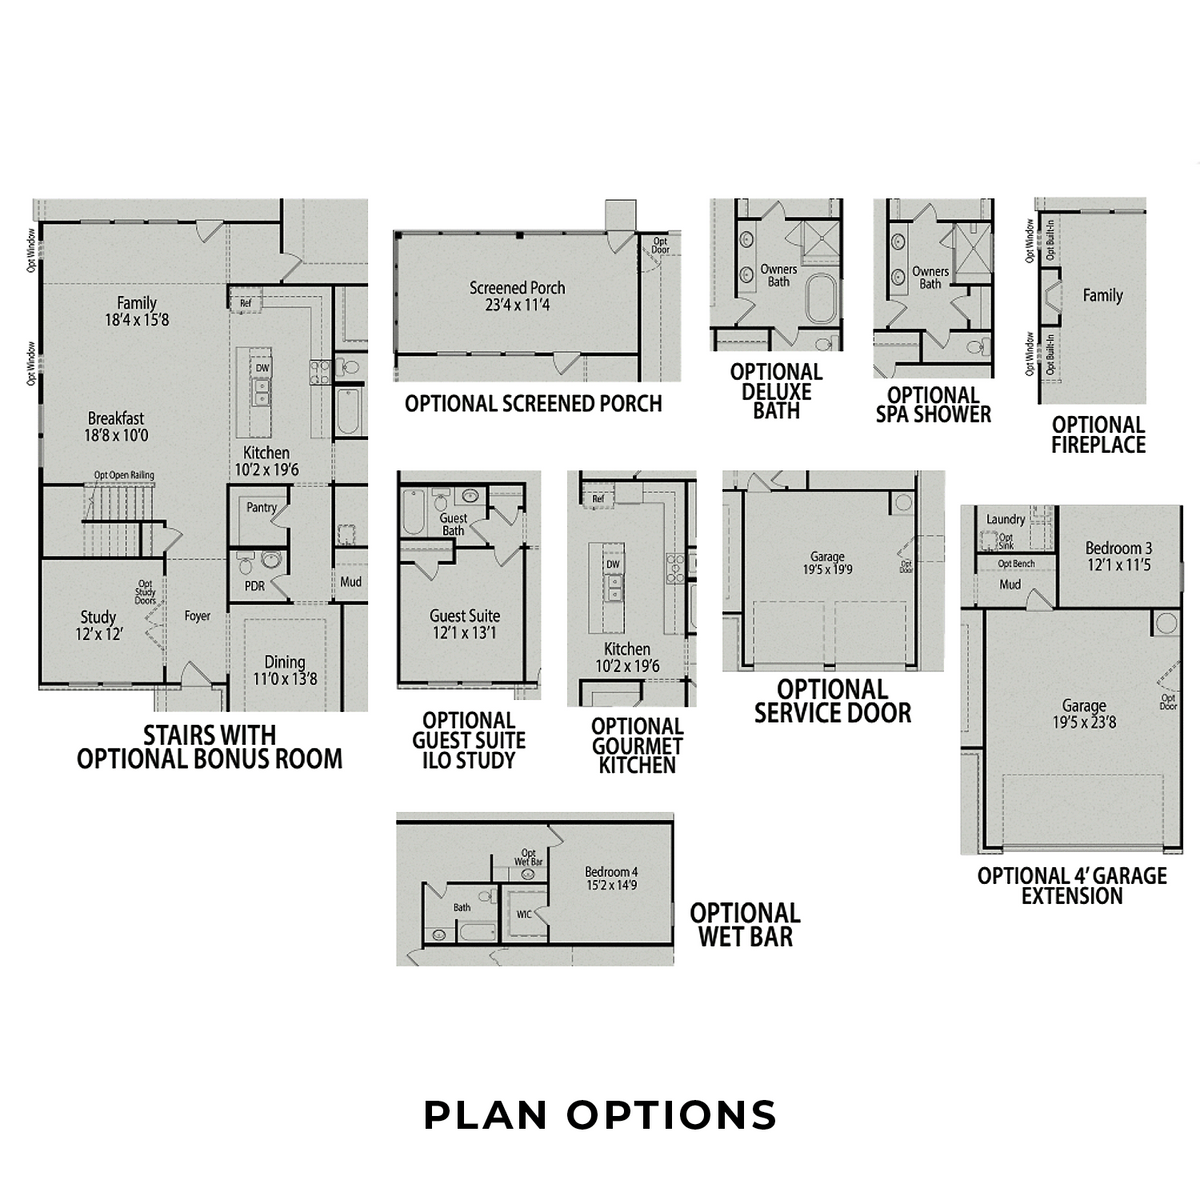 3 - The Magnolia A floor plan layout for 83 Golden Leaf Farms Road in Davidson Homes' Tobacco Road community.